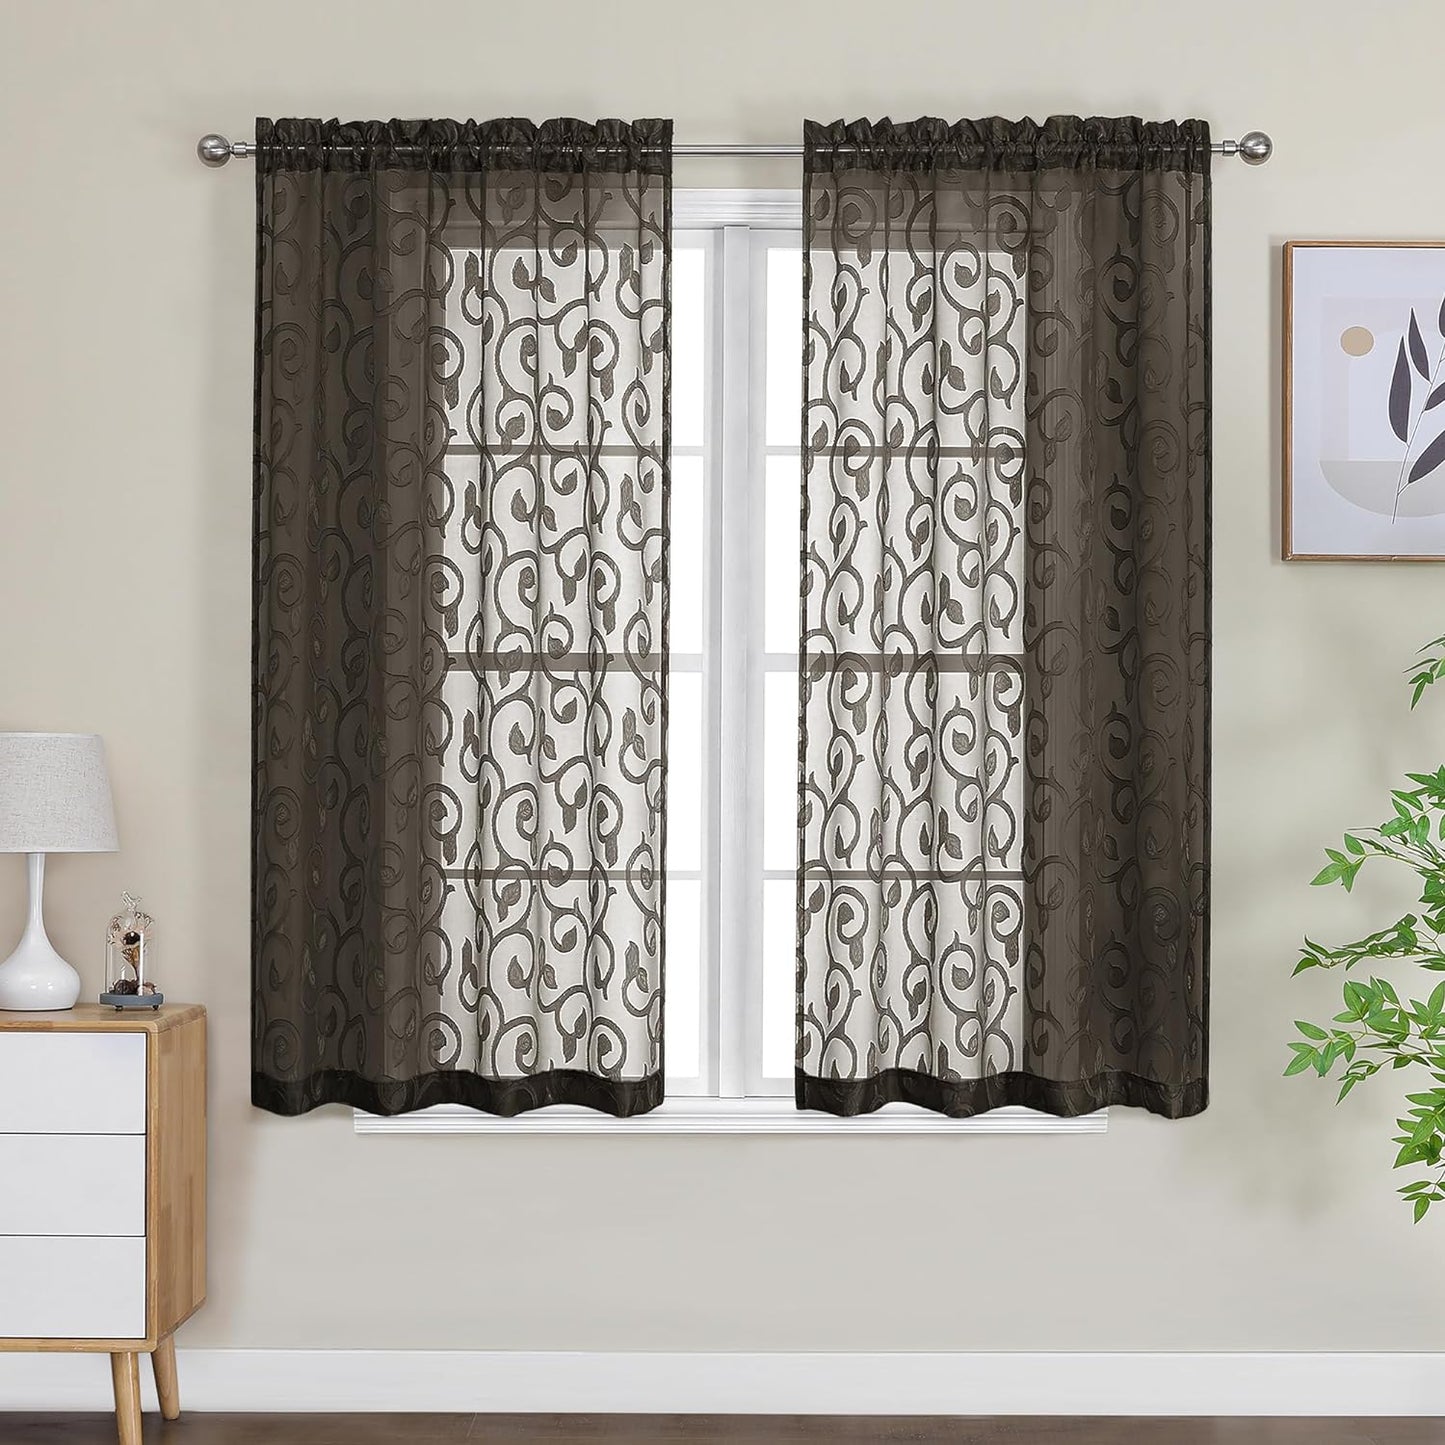 OWENIE Furman Sheer Curtains 84 Inches Long for Bedroom Living Room 2 Panels Set, Light Filtering Window Curtains, Semi Transparent Voile Top Dual Rod Pocket, Grey, 40Wx84L Inch, Total 84 Inches Width  OWENIE Chocolate 28W X 45L 